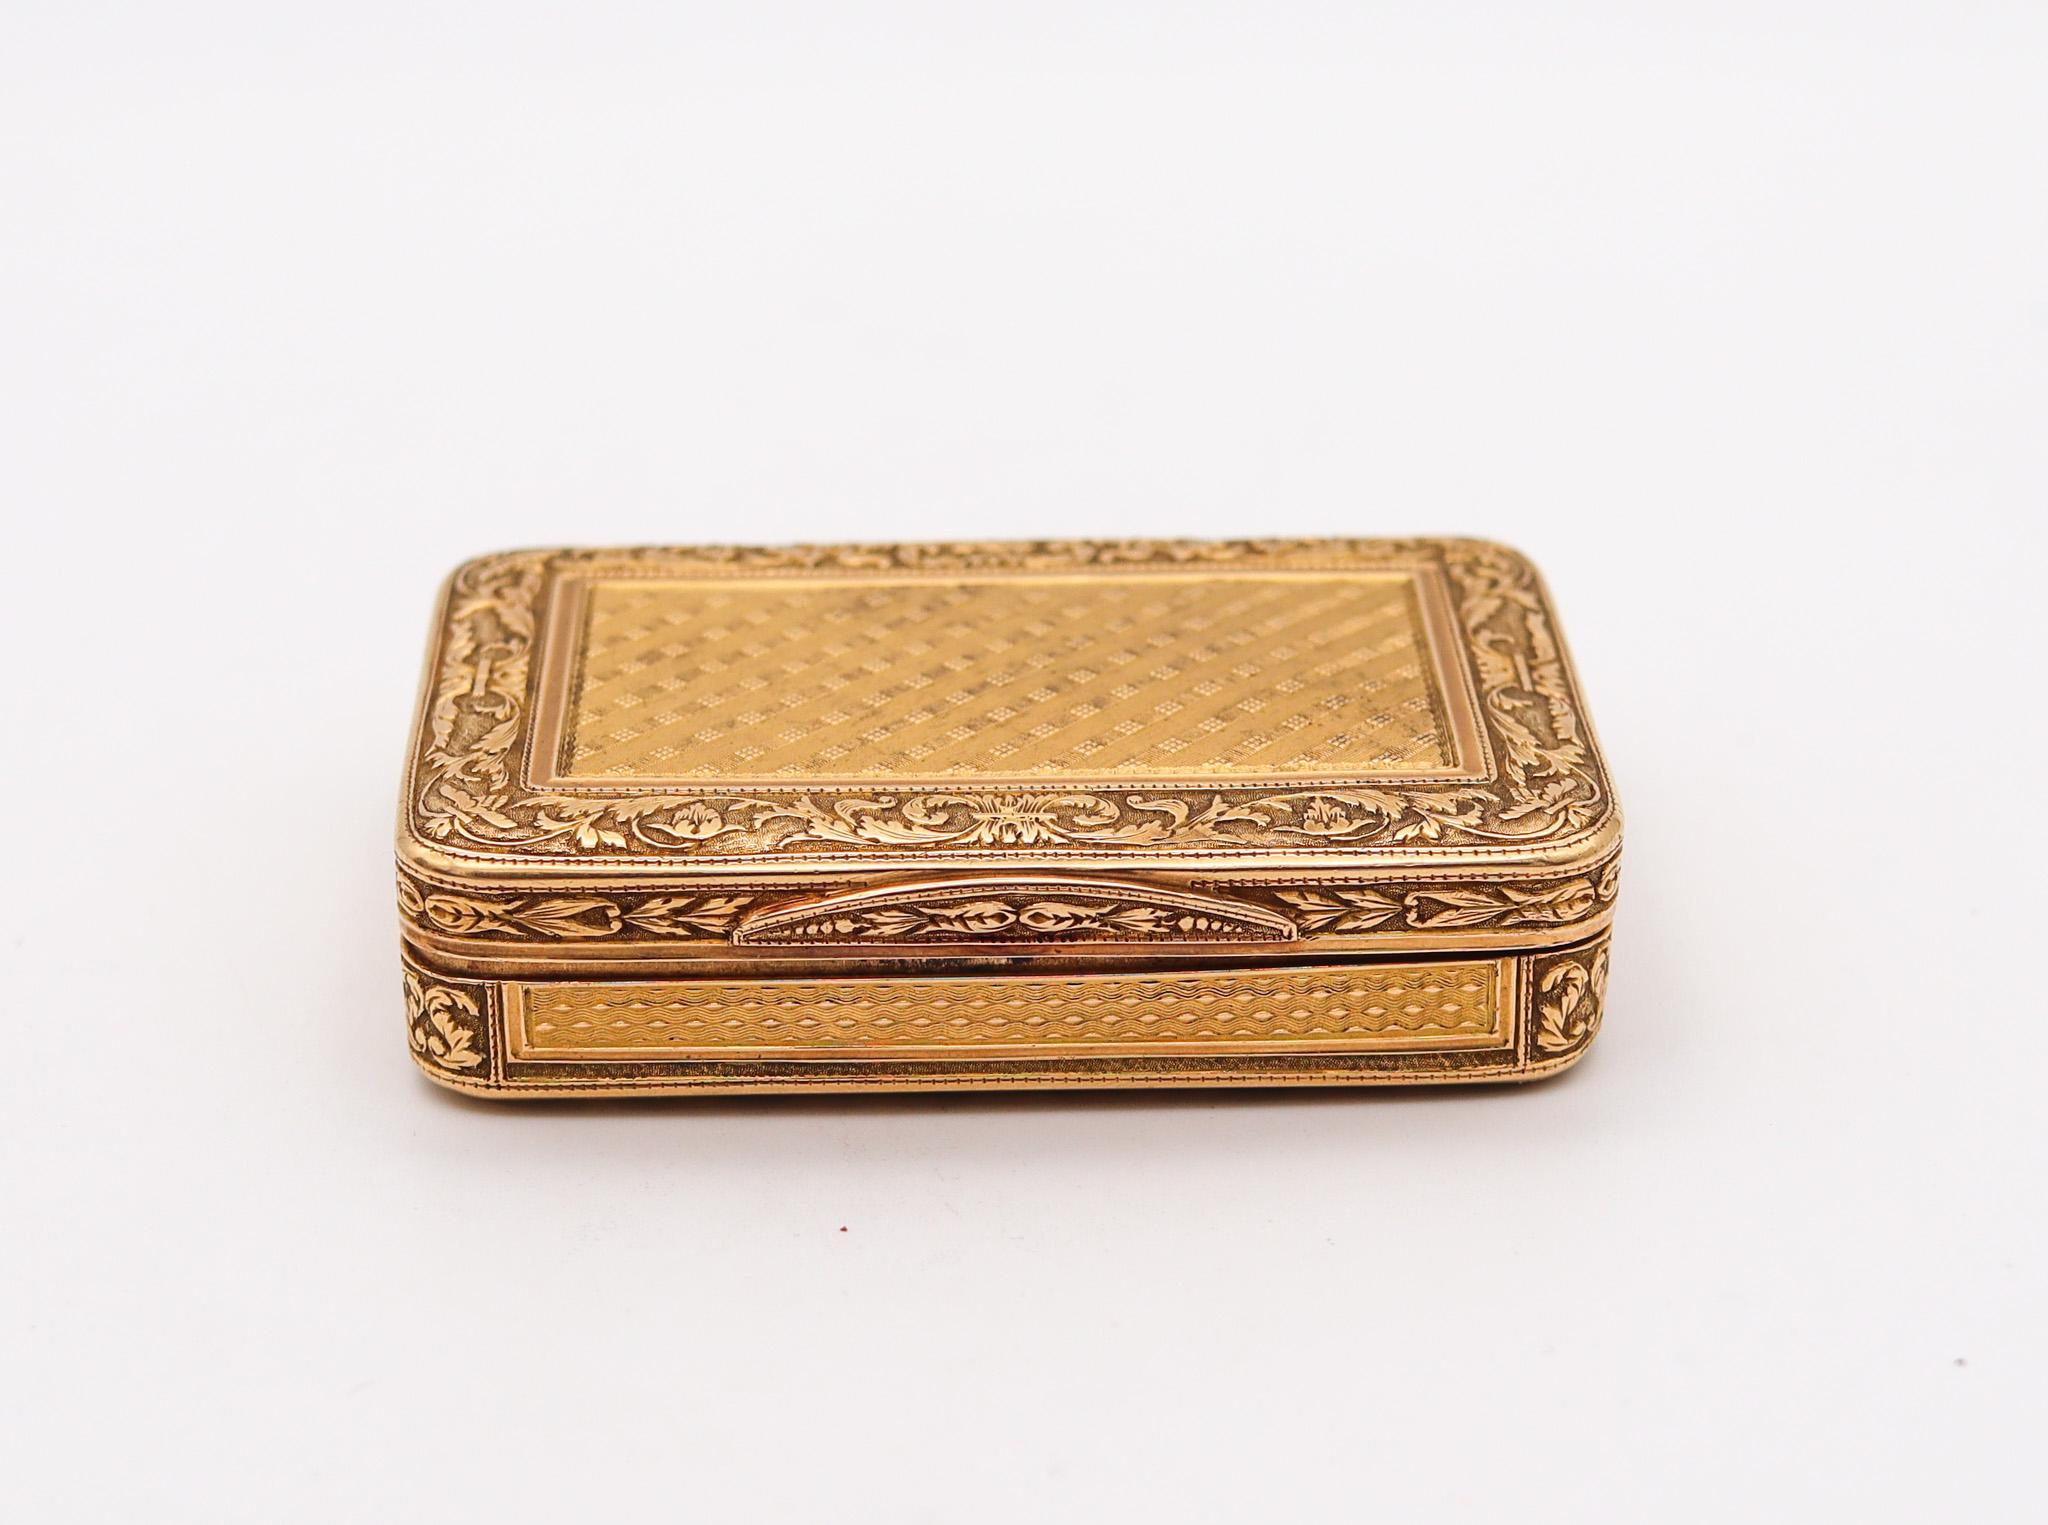 French snuff box in solid gold.

Exceptional rectangular snuff box, created in Paris France during the kingdom of Louis XVI, in the last quarter of the 18th century, circa 1790. It was carefully crafted in the iconic neoclassic style in solid yellow